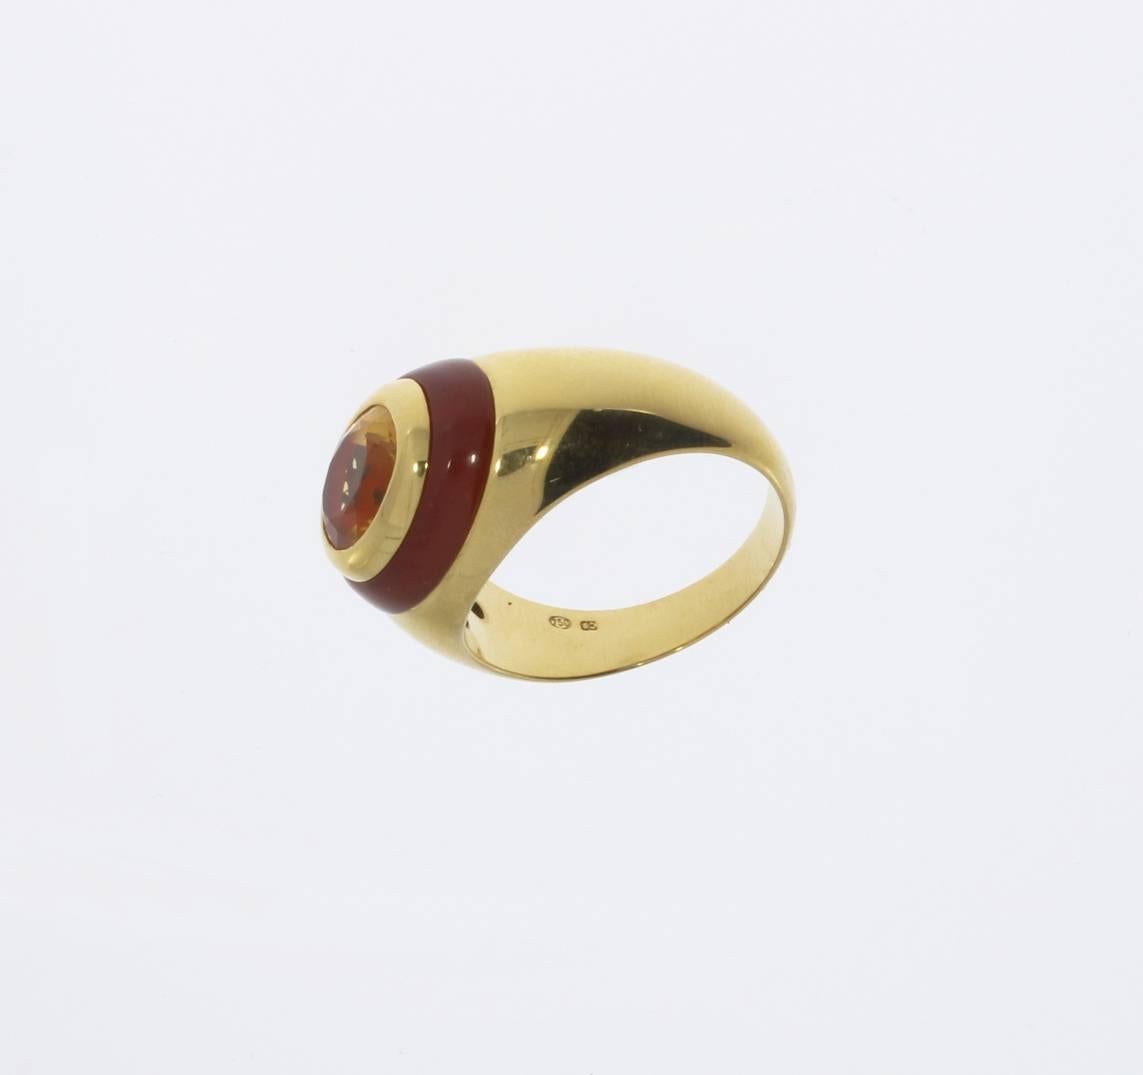 Set with oval shaped citrine in bezel setting edged by carnelian band and mounted in 18 K yellow gold. 
Hallmarked inside with the purity 750 and OE. Total weight: 14,52 g. Height: 0.35 in ( 0,9 cm ) Ring size: 65 ( US 11 ) 

